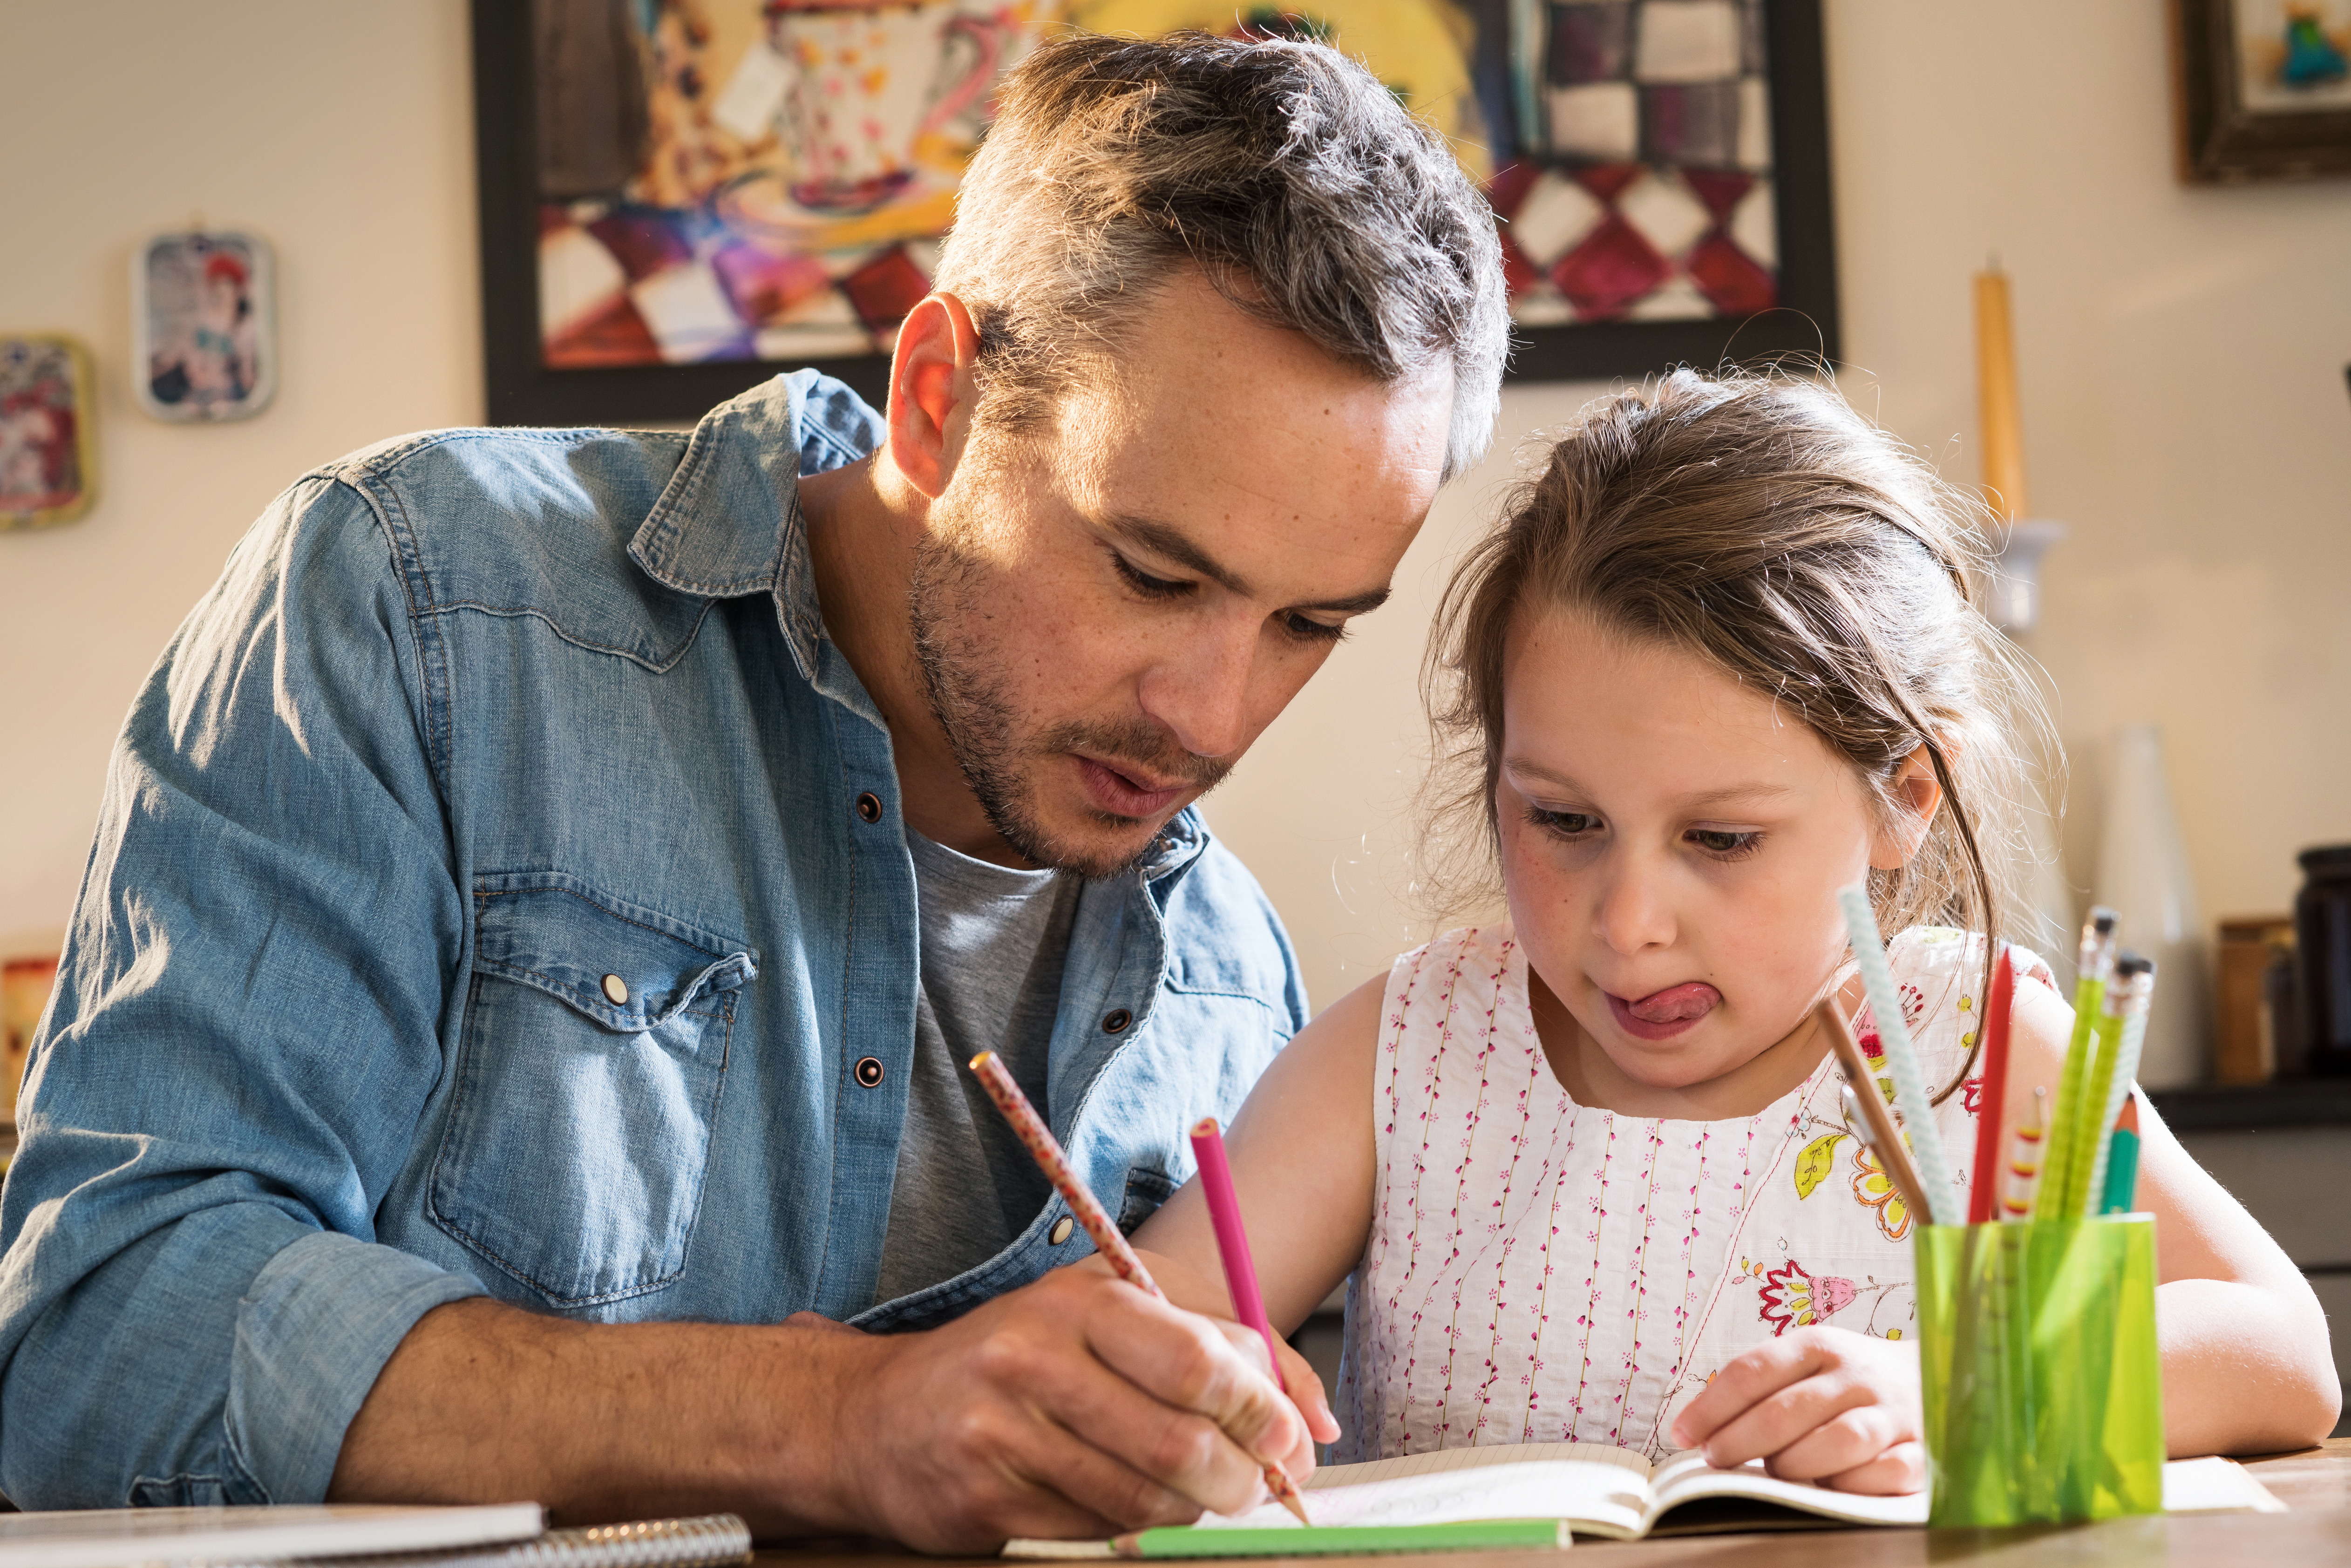 A father helping his daughter with homework | Source: Shutterstock